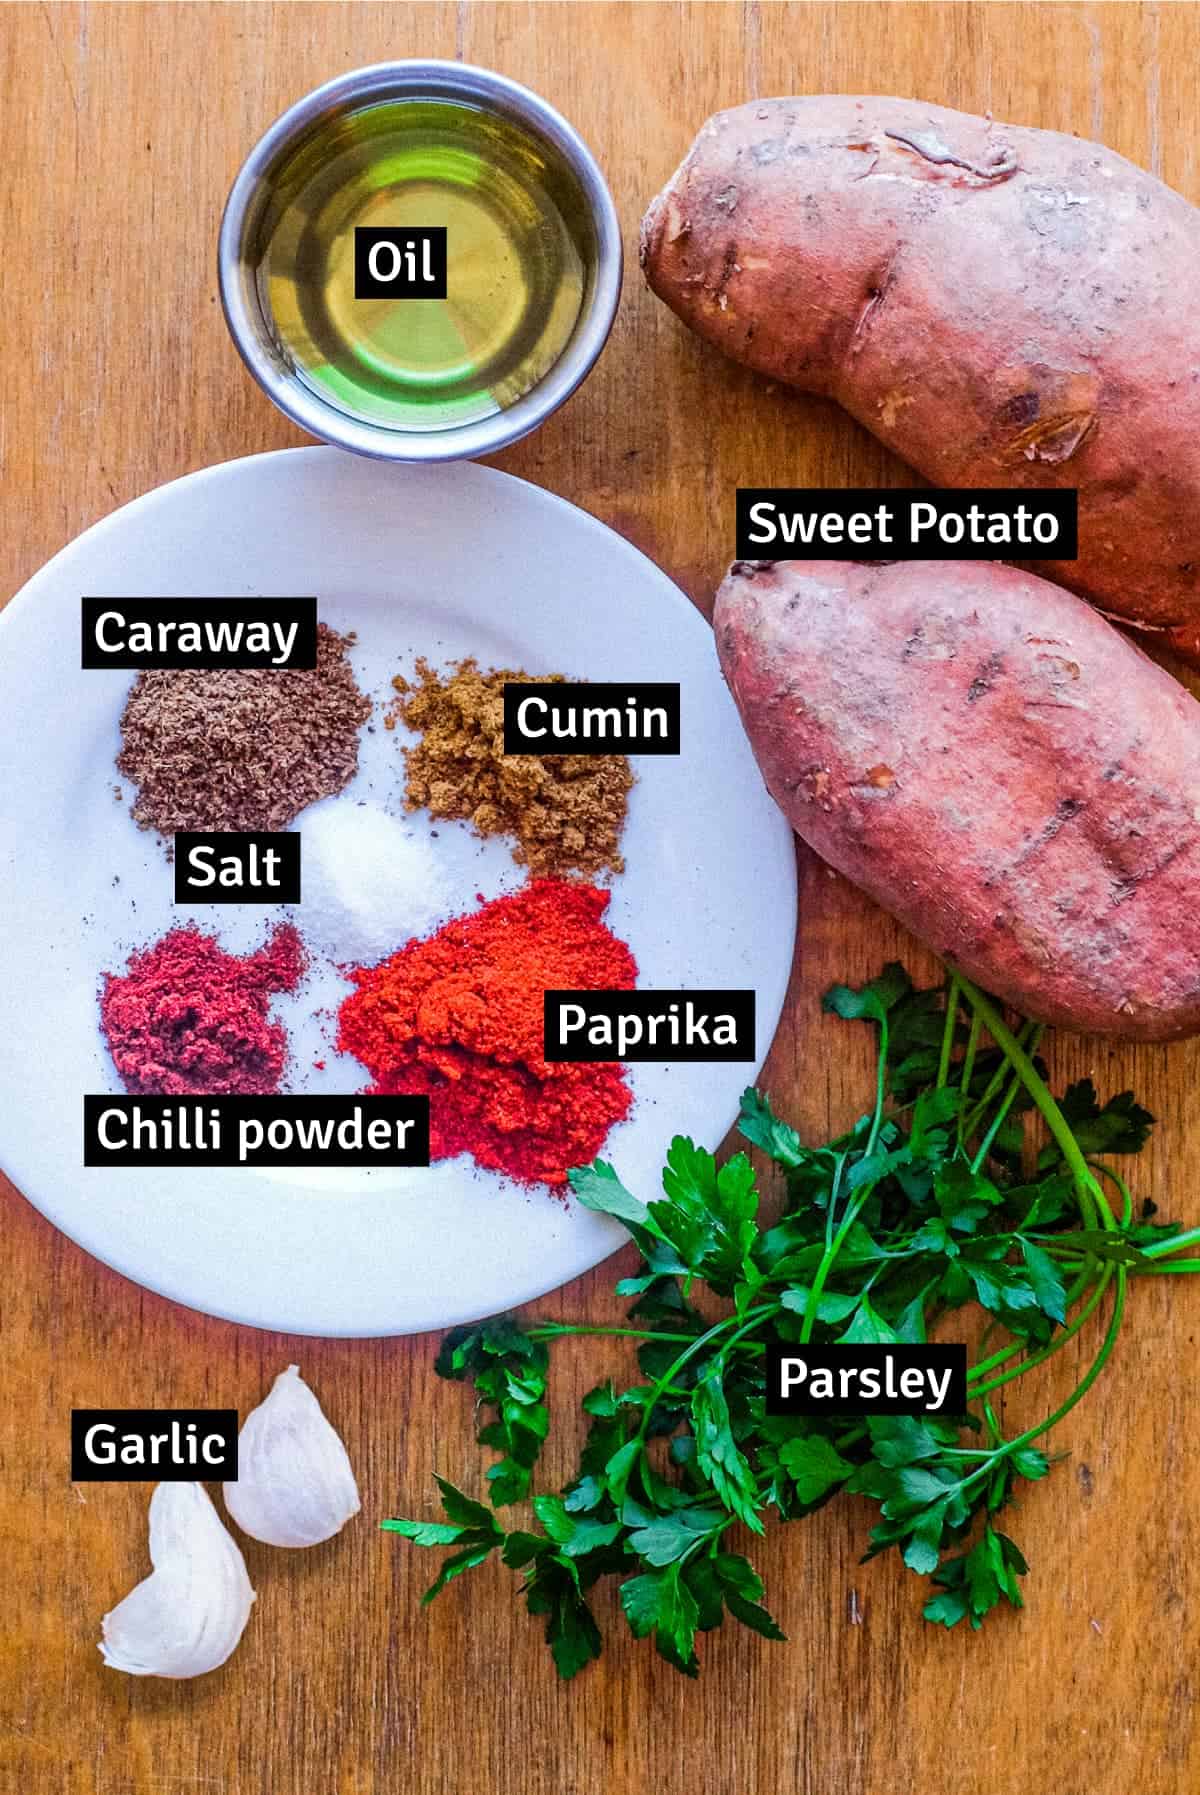 The ingredients for Pilpelchuma with sweet potatoes: sweet potatoes, cumin, caraway, chilli powder, salt, paprika, oil garlic and parsley.